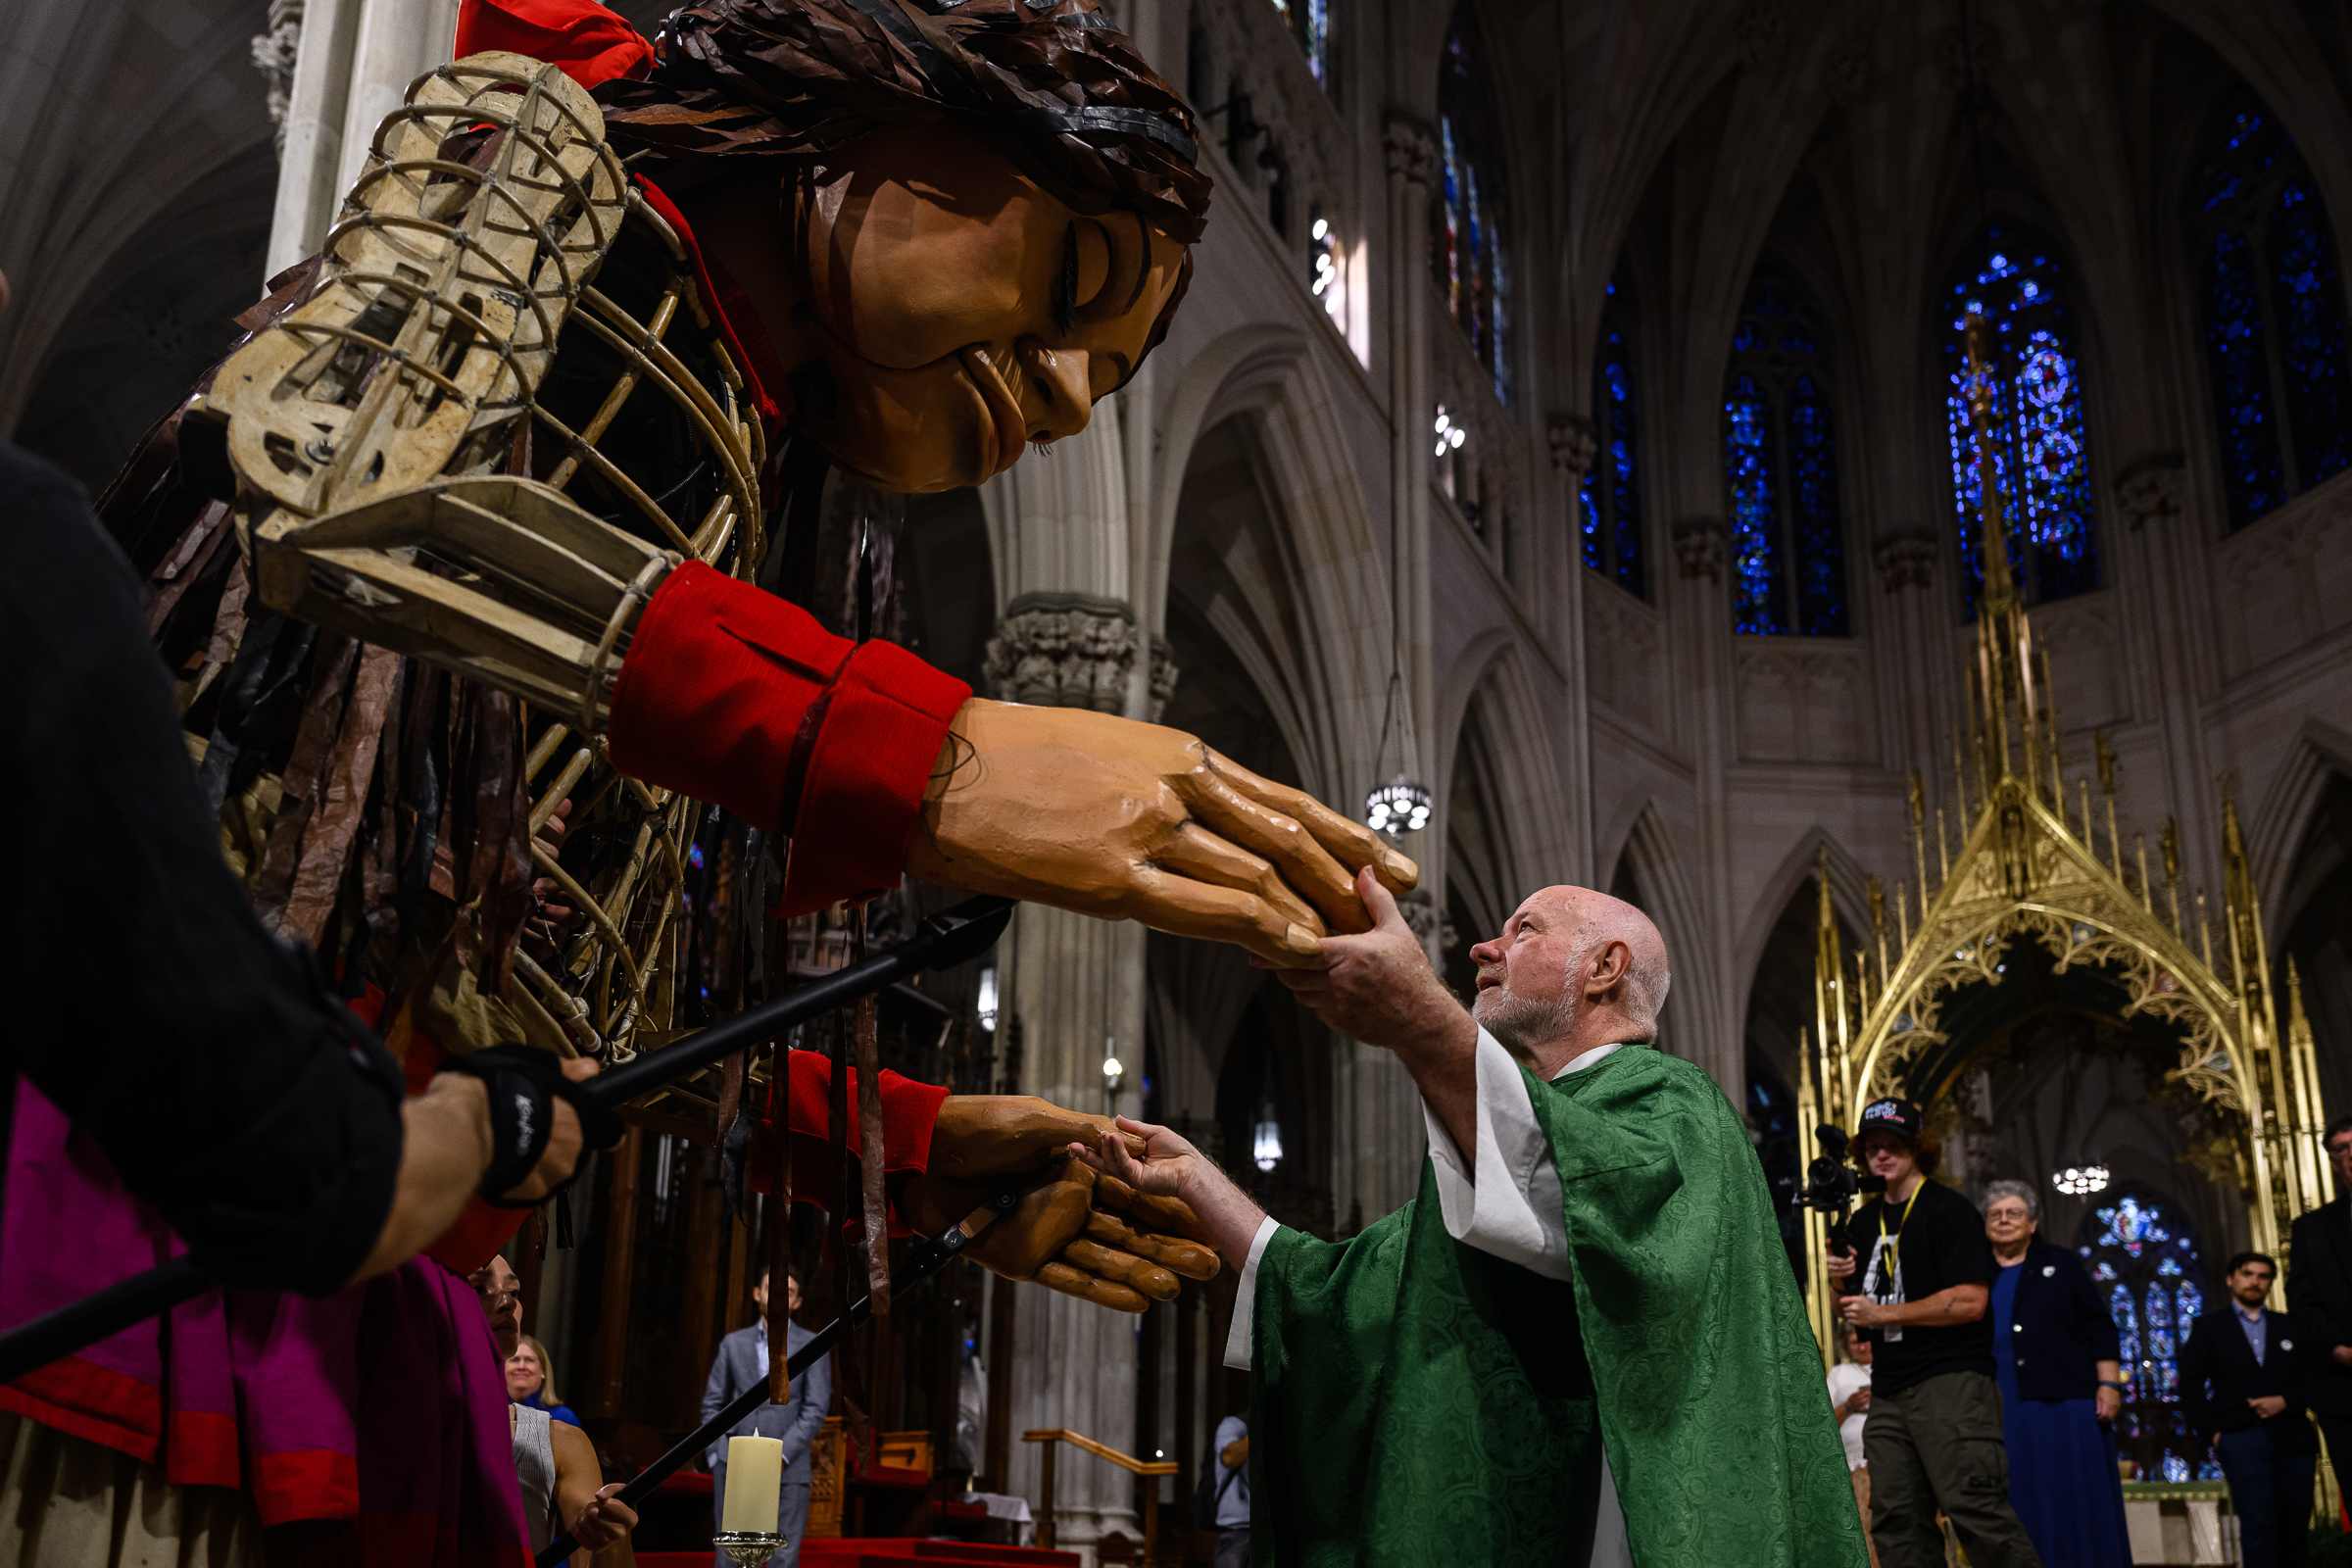 Labor workers uplifted at St. Patrick’s Cathedral annual Labor Mass